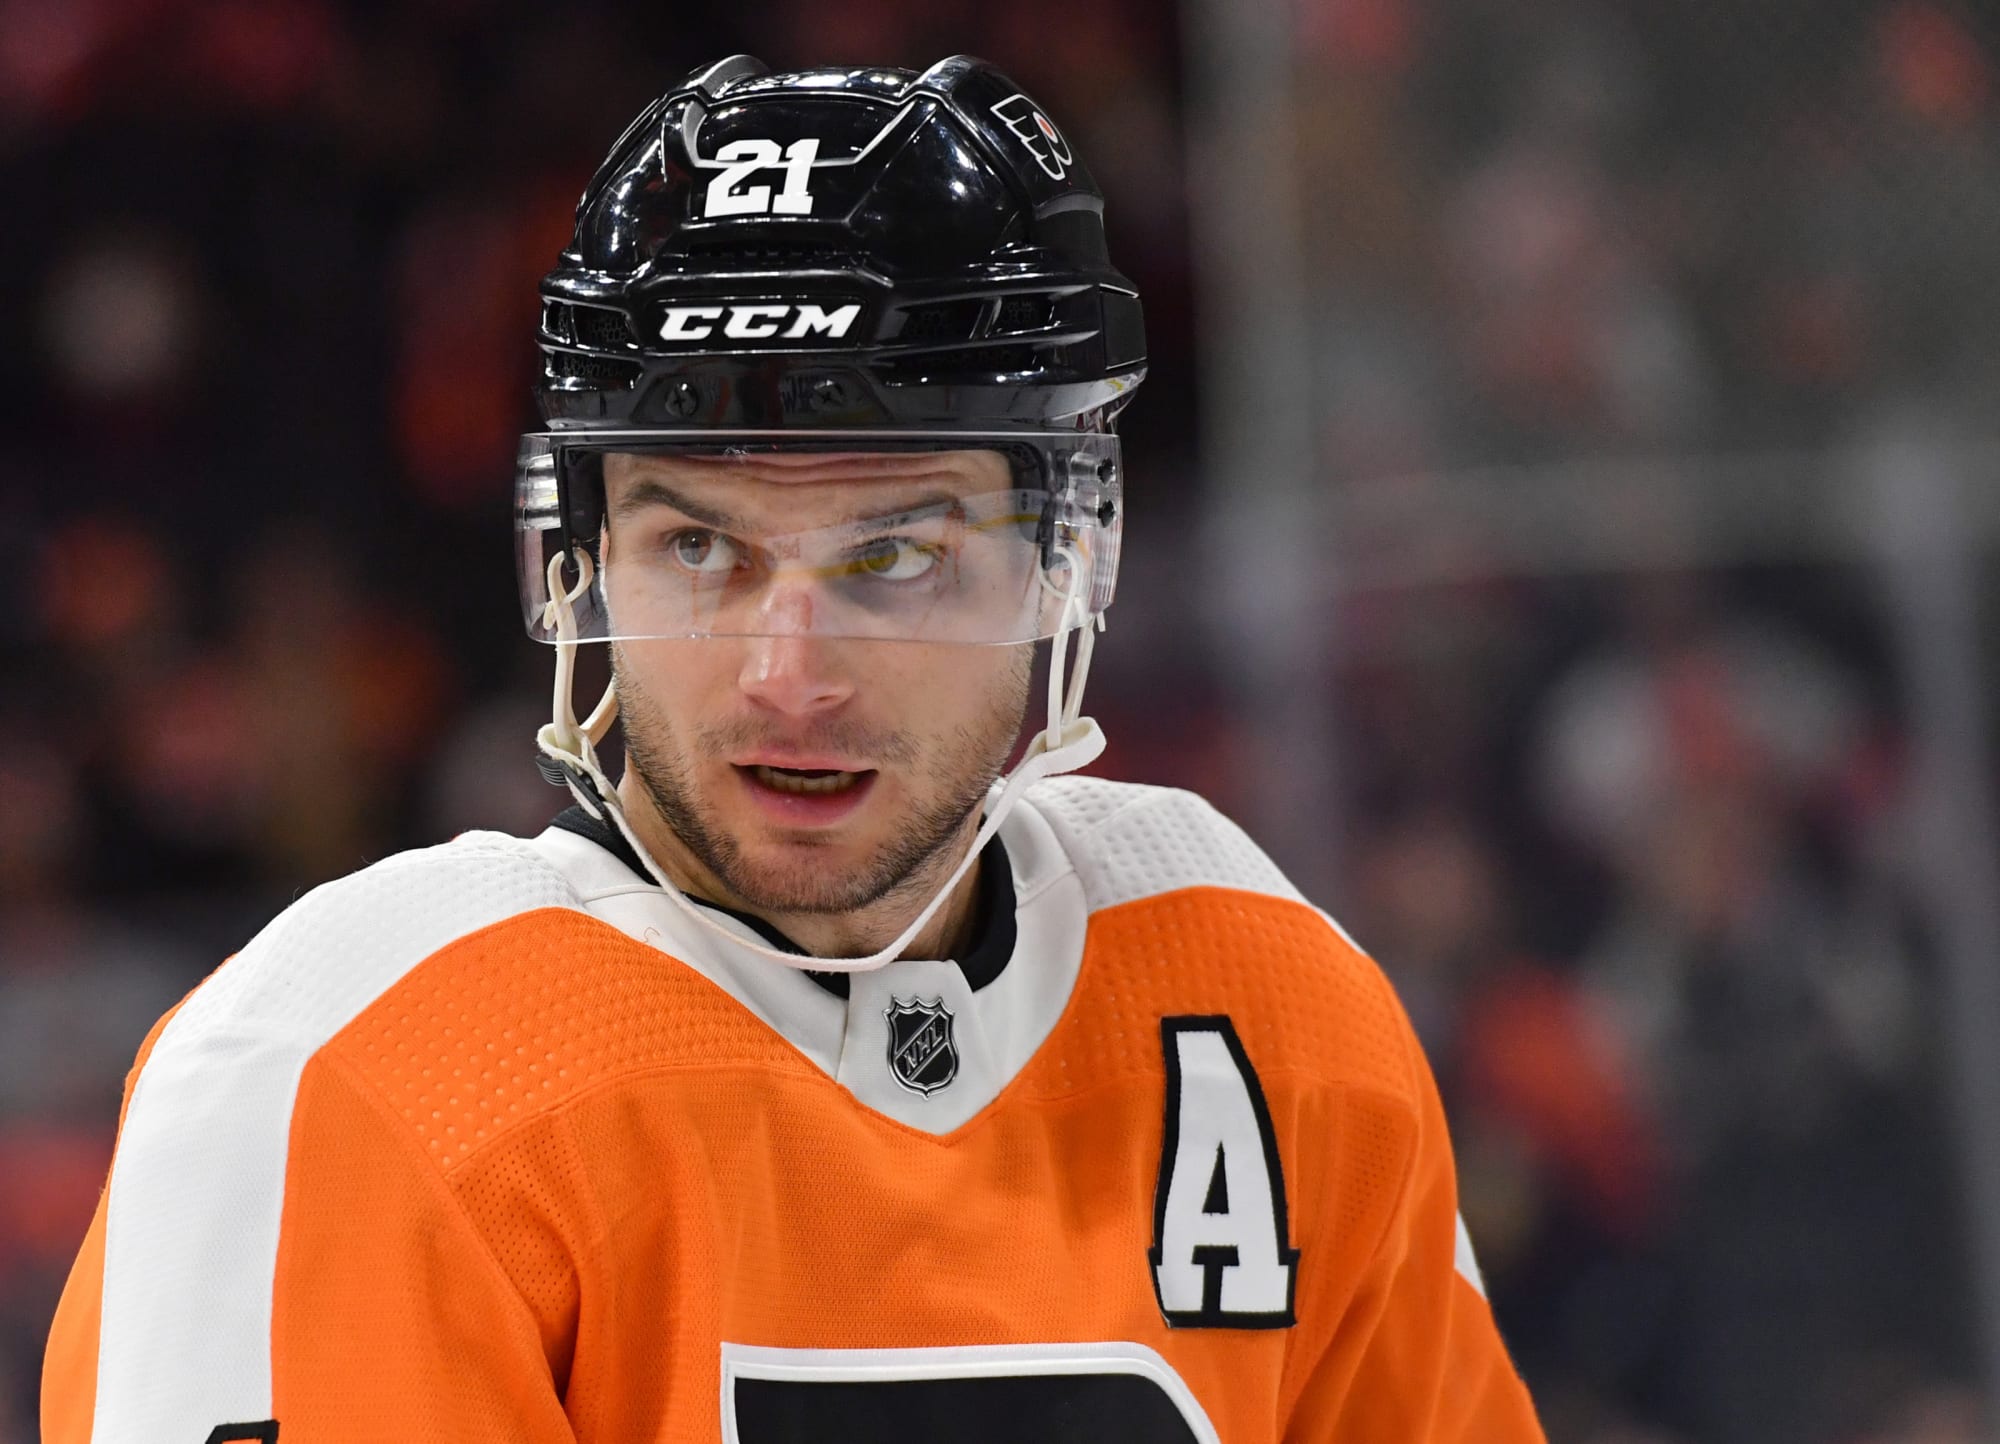 Scott Laughton’s Time to Shine is Now